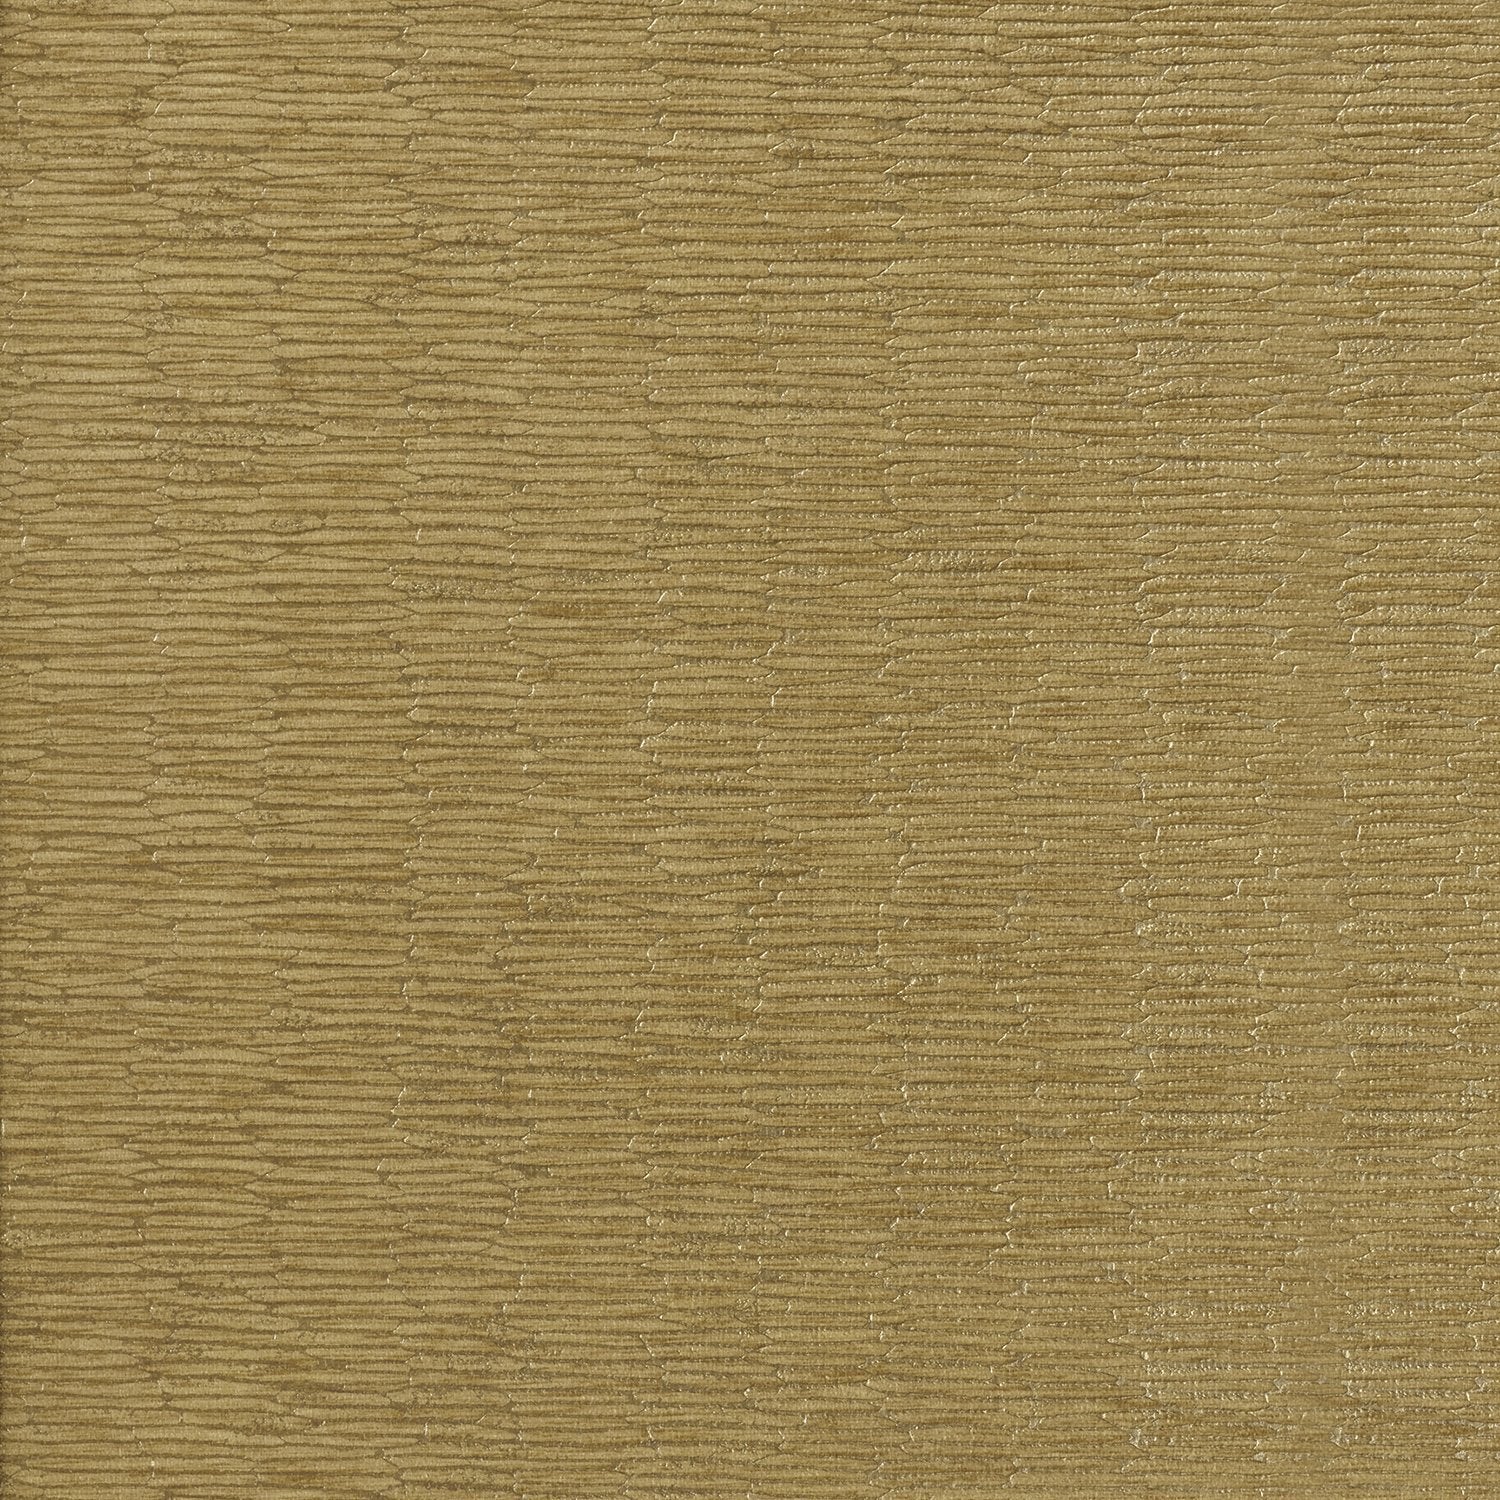 Chipper - Y46851 - Wallcovering - Vycon - Kube Contract